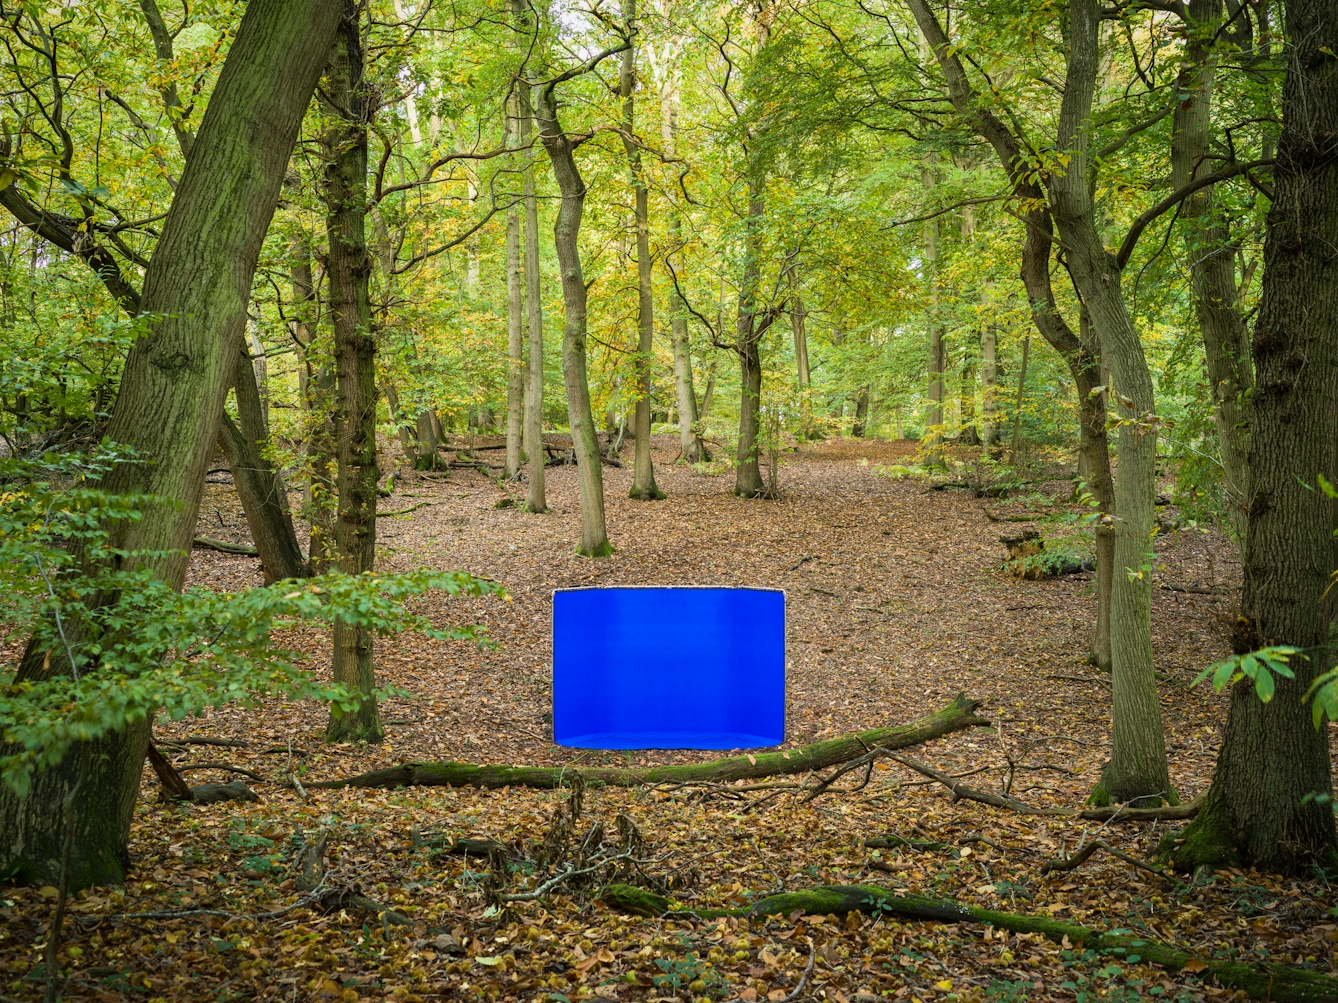 Colour landscape photograph showing an ancient woodland scene. In the lower centre of the image, in a clearing, is a large rectangular photographic background frame. Stretched across the frame is a vibrant blue chroma key fabric. The floor of the wood is covered in rust coloured leaves and fallen branches. To the left and right of the image tall strong tree trunks rise up through the frame to a canopy of green leaves. As the scene recedes into the distance the ground rises and tree trunks continue to rise up around the screen. The leaves of the trees obscure all the sky from view, save for a few bright glimpses here and there.